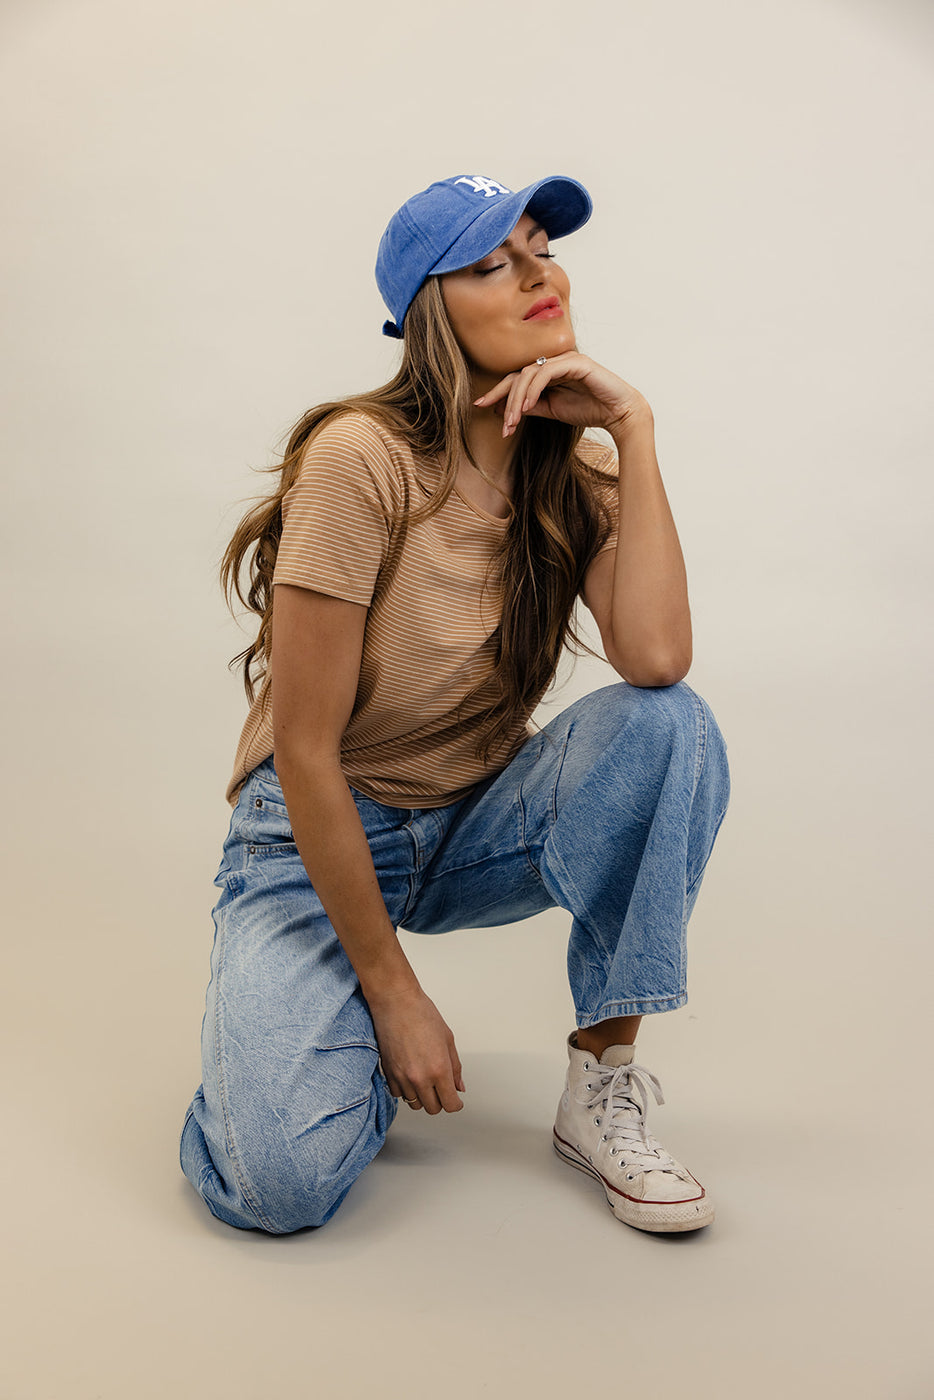 a woman in a hat and jeans squatting